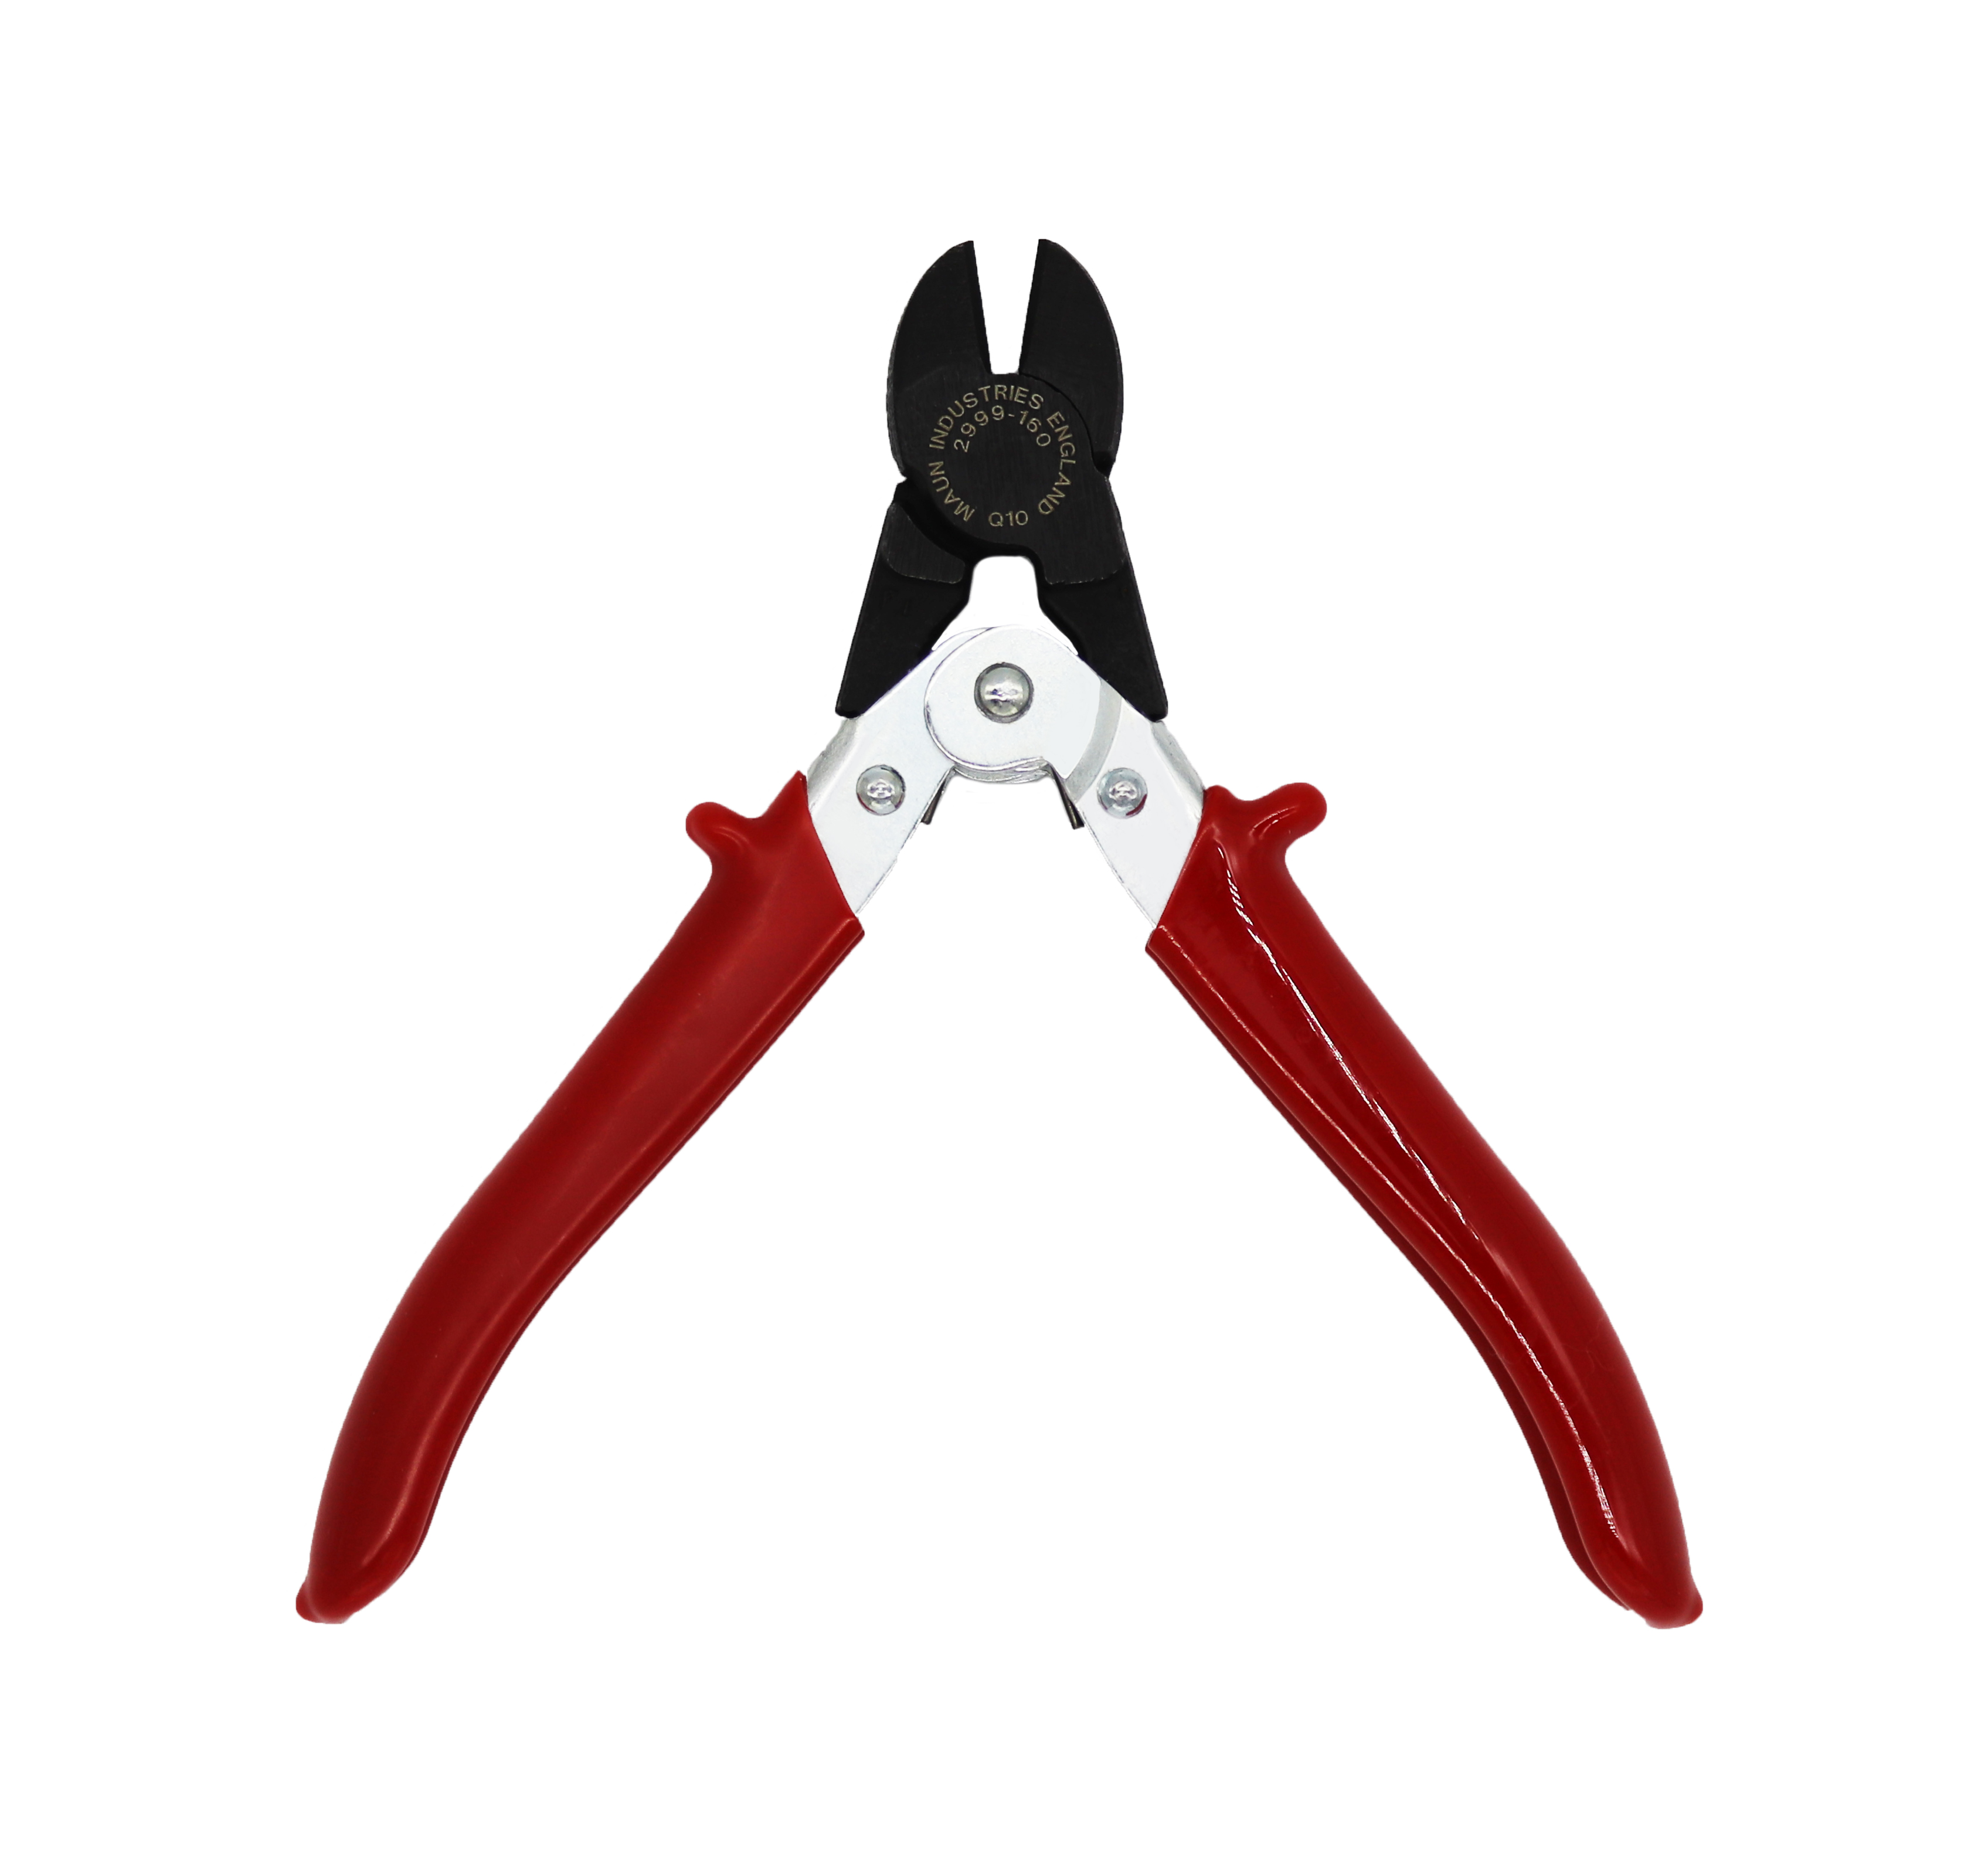 2 Pack Wire Cutters, Flush Cutters With Spring, Precise Wire Snips